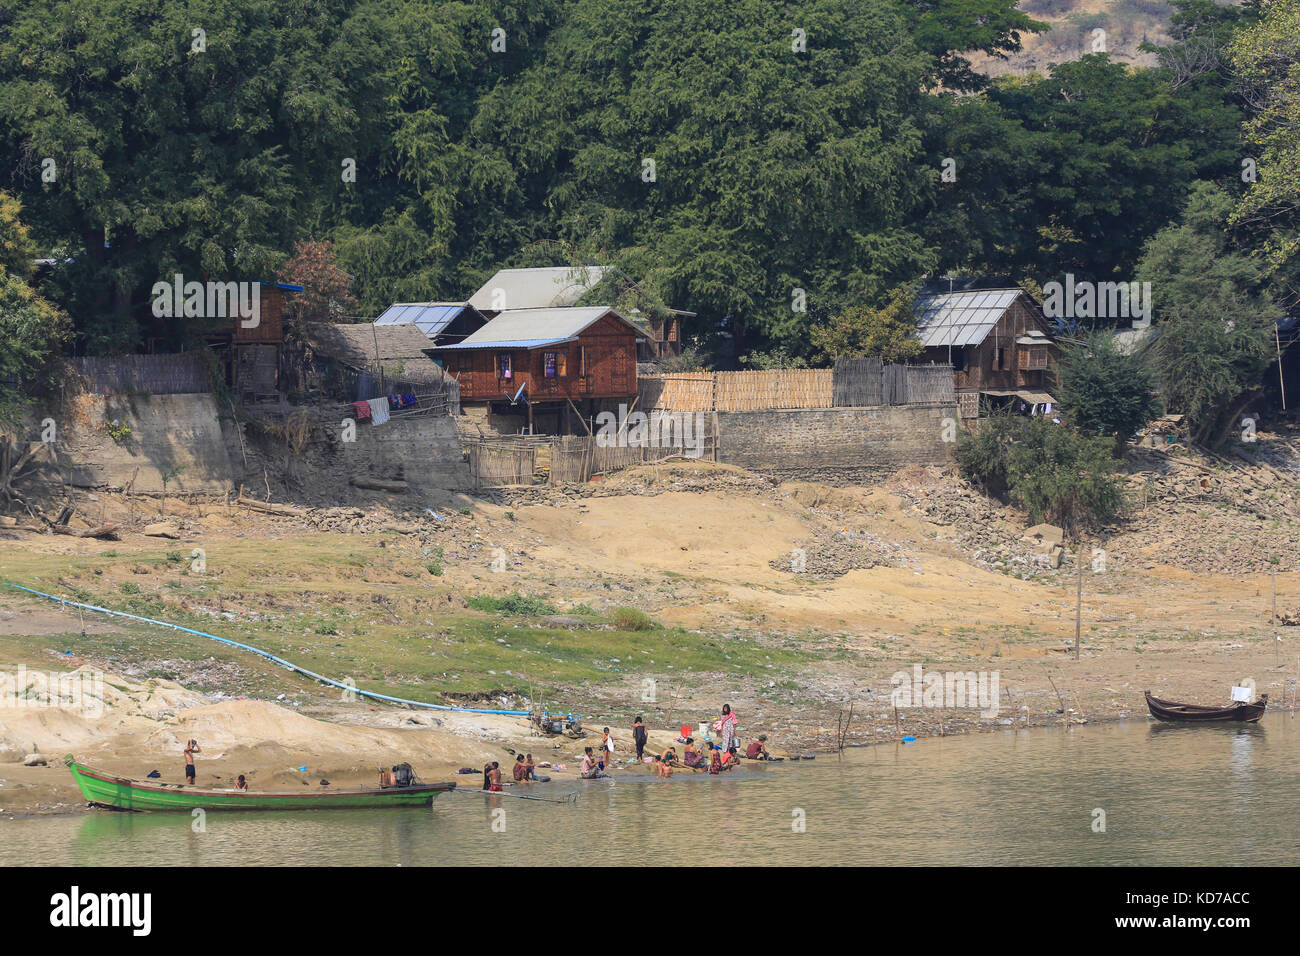 Villagers washing laundry and themselves in the Irrawaddy River, Myanmar (Burma). Stock Photo